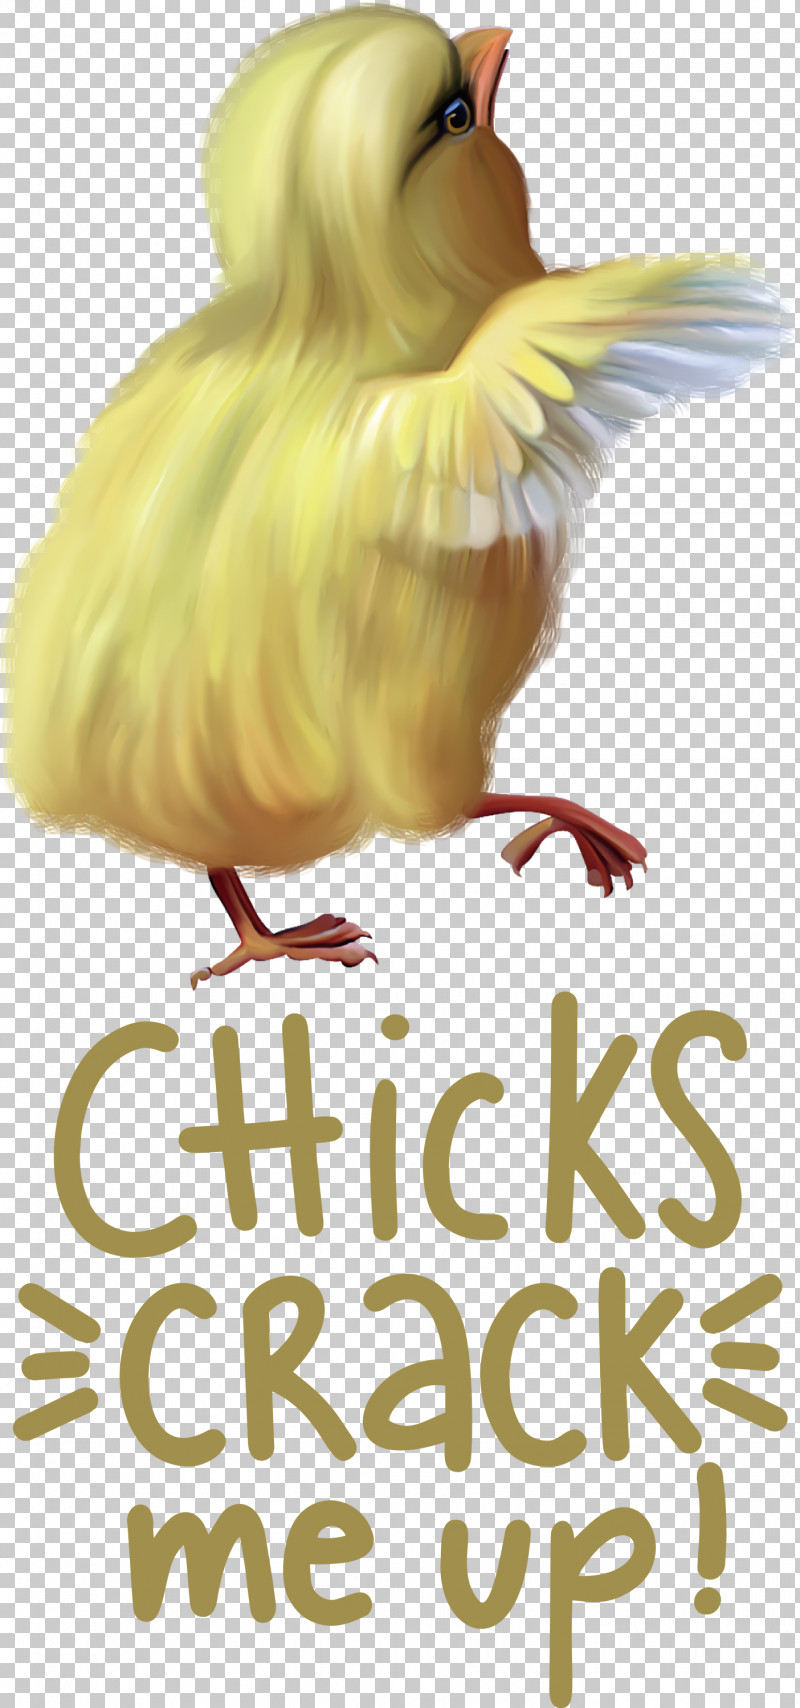 Chicks Crack Me Up Easter Day Happy Easter PNG, Clipart, Beak, Biology, Birds, Chicken, Easter Day Free PNG Download